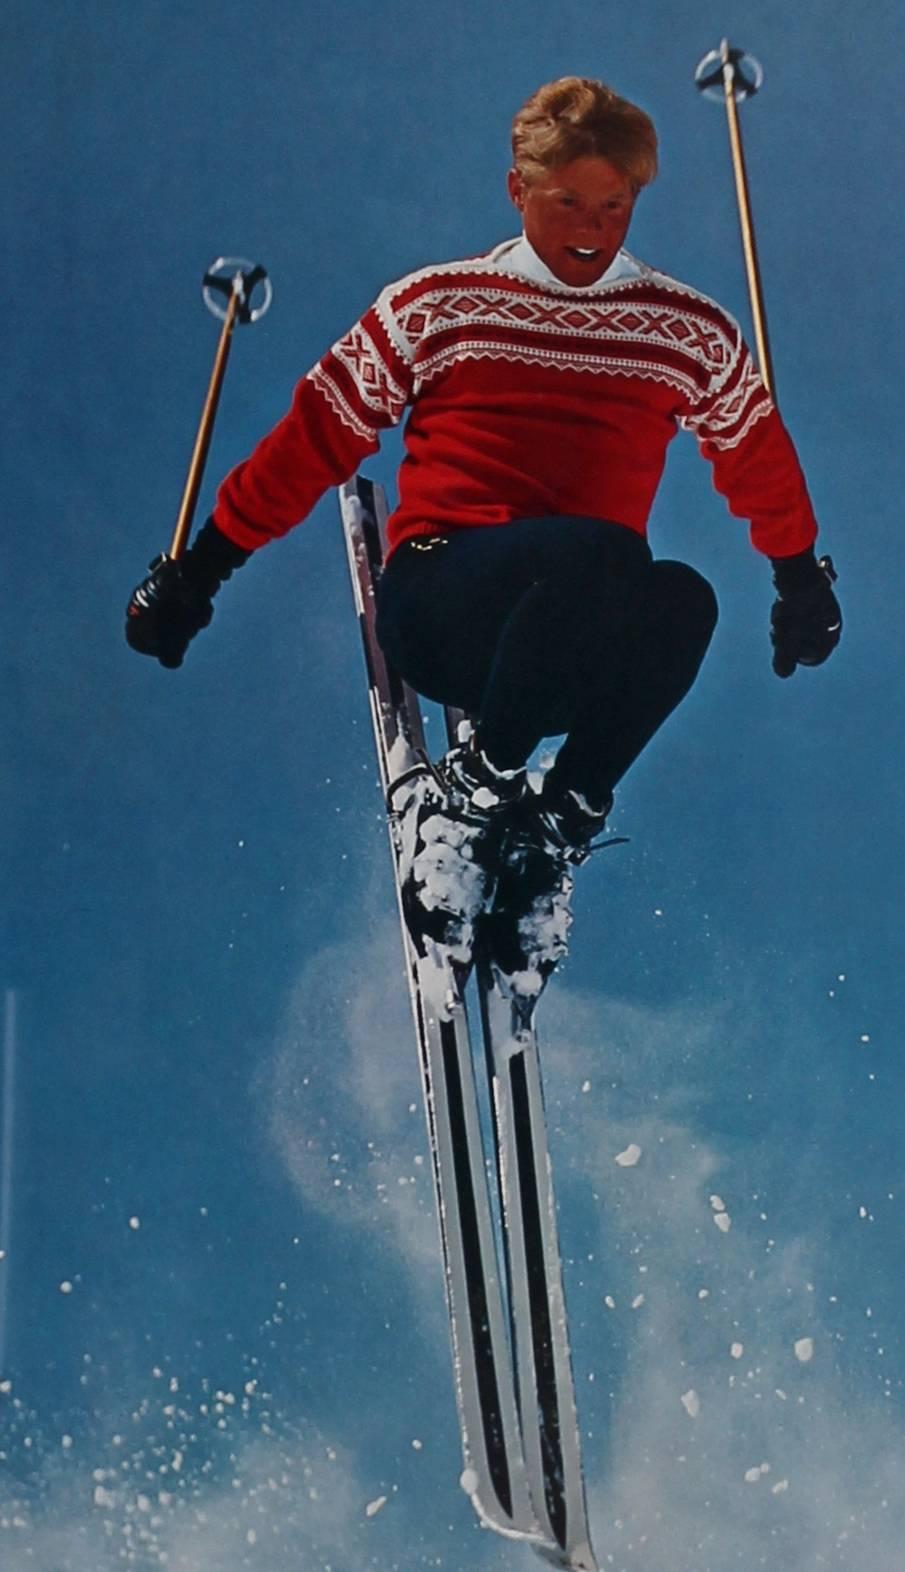 Original 1960's Californian skiing poster - Print by Unknown